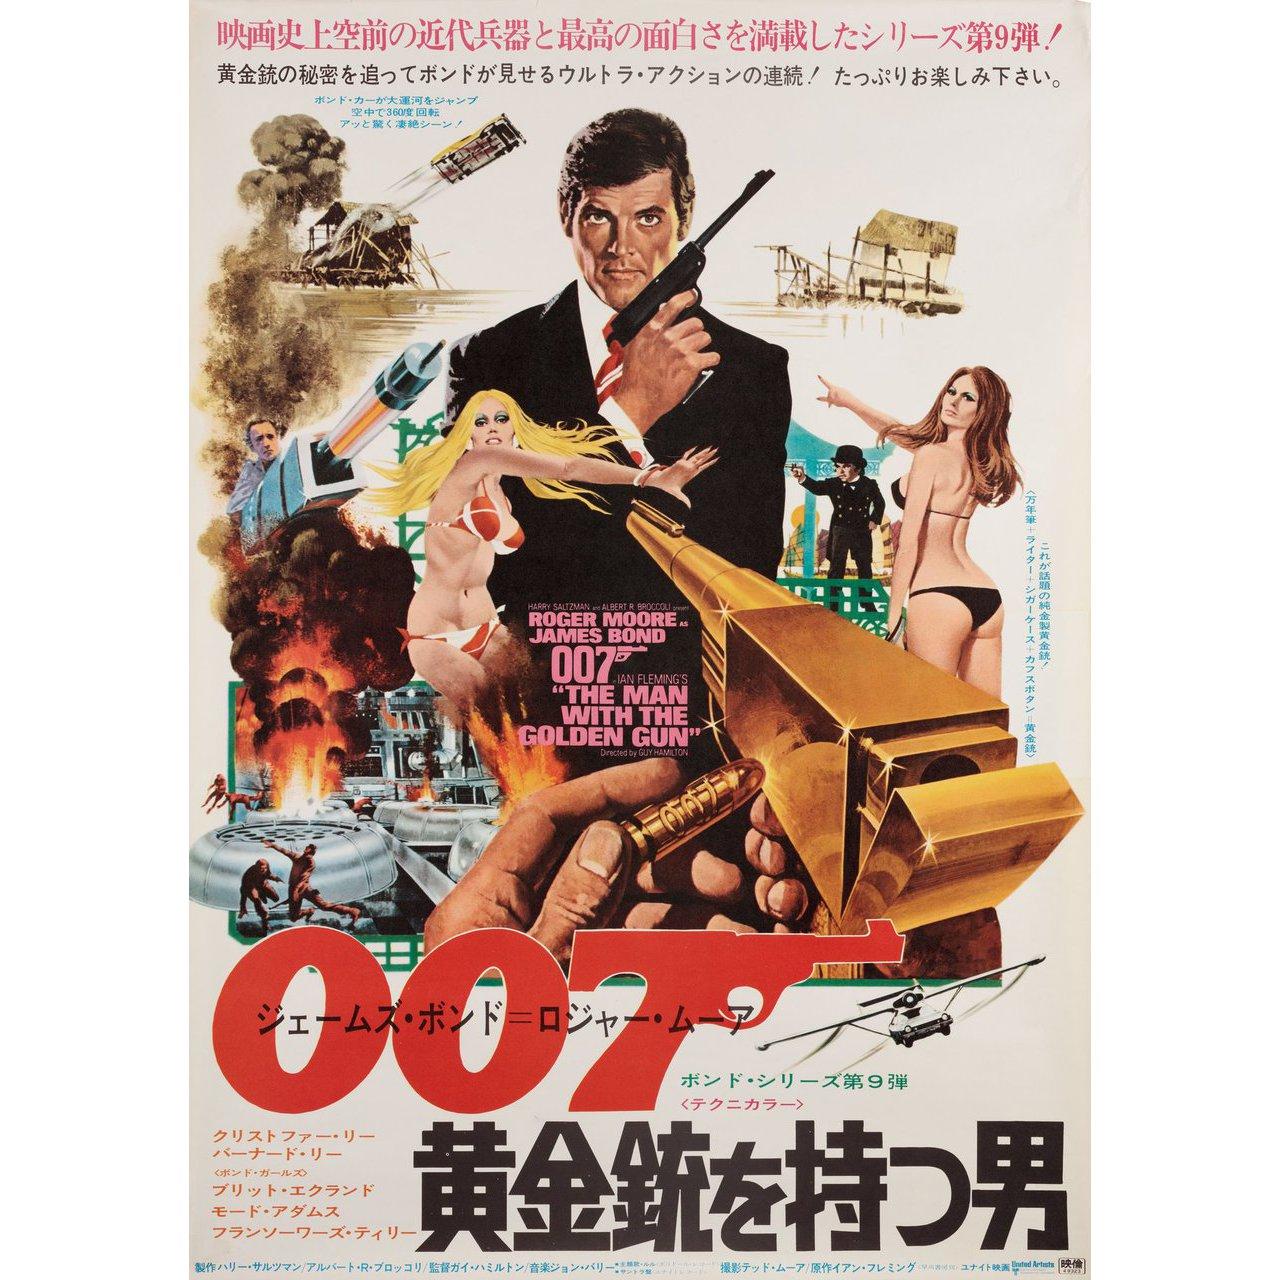 Original 1974 Japanese B2 poster by Robert McGinnis for the film The Man with the Golden Gun directed by Guy Hamilton with Roger Moore / Christopher Lee / Britt Ekland / Maud Adams. Very Good-Fine condition, rolled. Please note: the size is stated